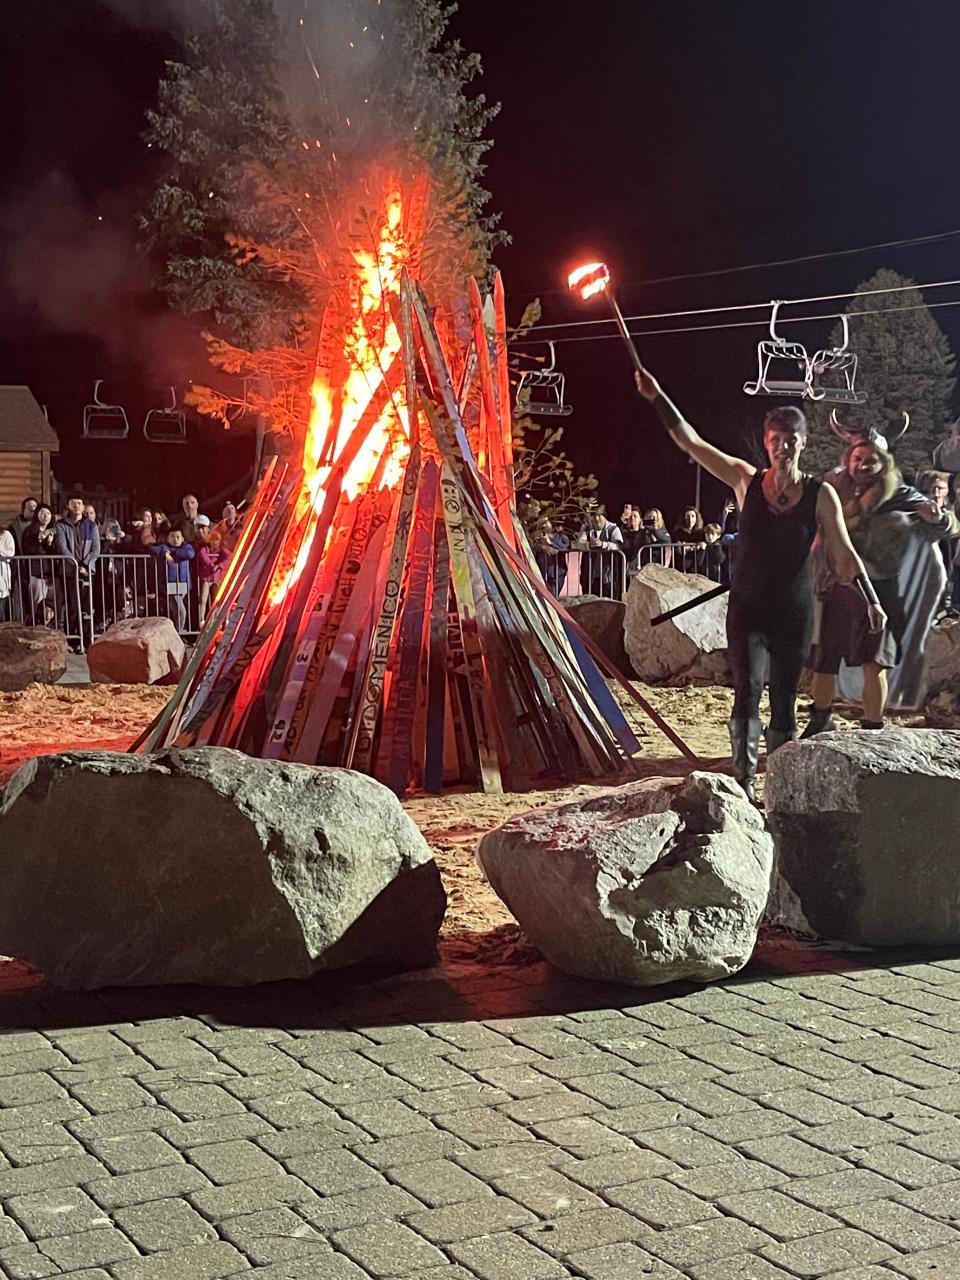 A fire dancer and viking lit the bonfire for Ullr, a Norse god that winter sports fans call to for a snowy winter on Saturday, Nov. 12, 2022.